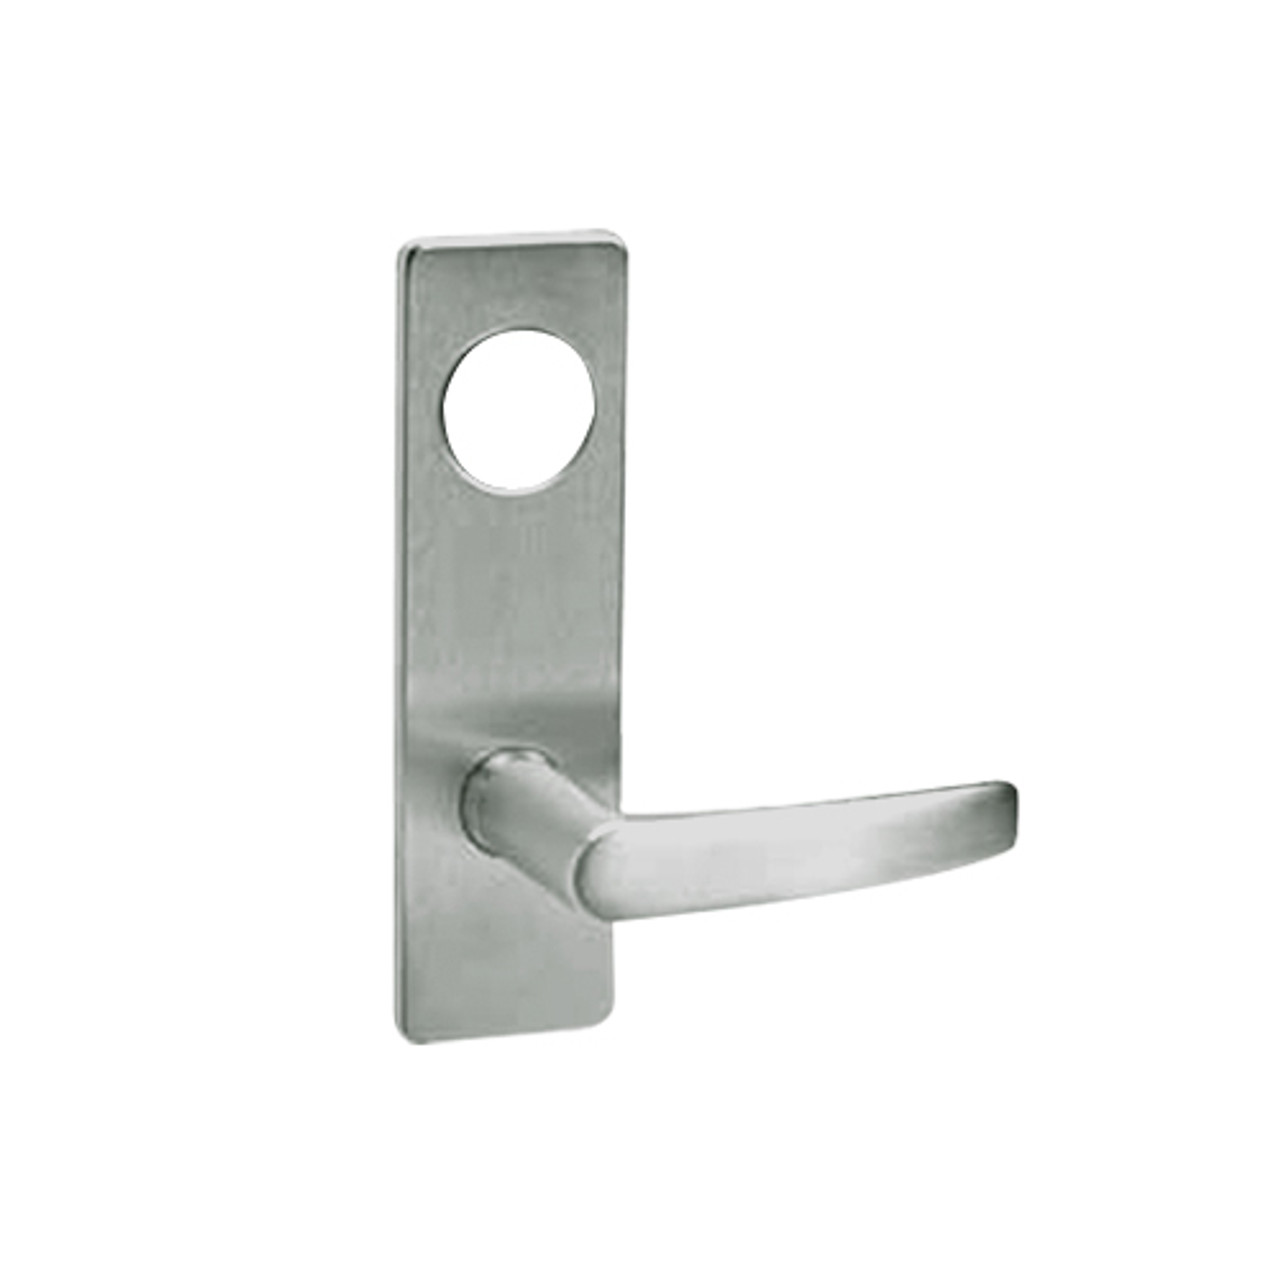 ML2022-ASR-619-CL6 Corbin Russwin ML2000 Series IC 6-Pin Less Core Mortise Store Door Locksets with Armstrong Lever with Deadbolt in Satin Nickel